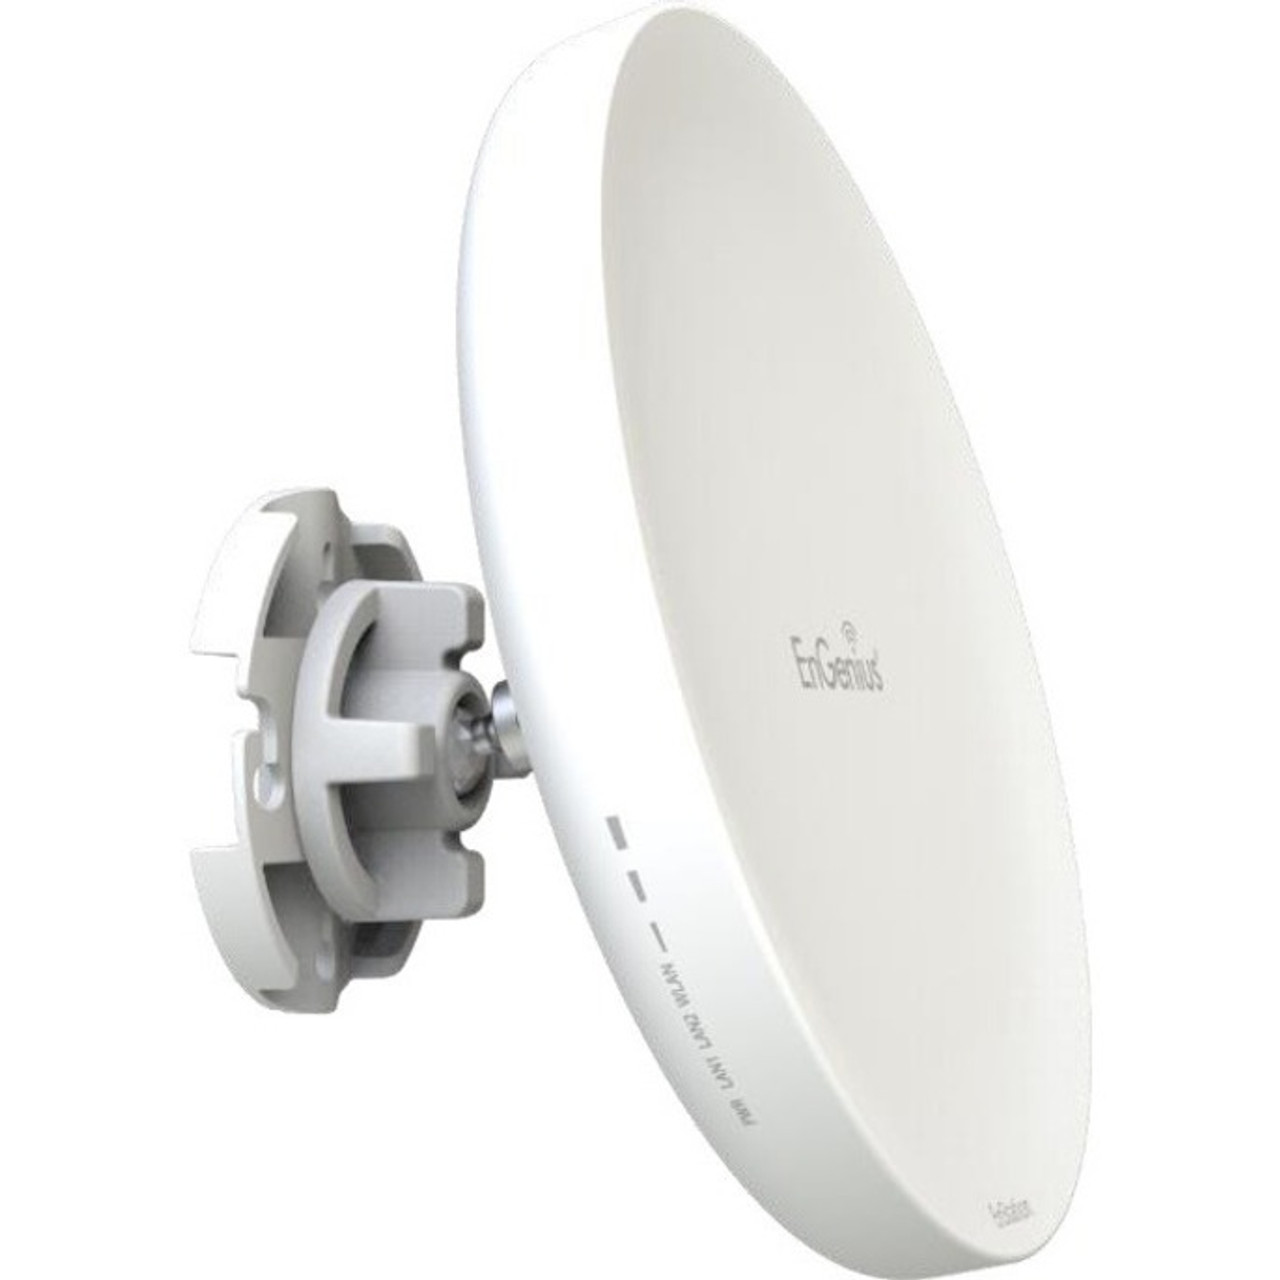 EnGenius 11ac Wave 2 support both CSMA and TDMA